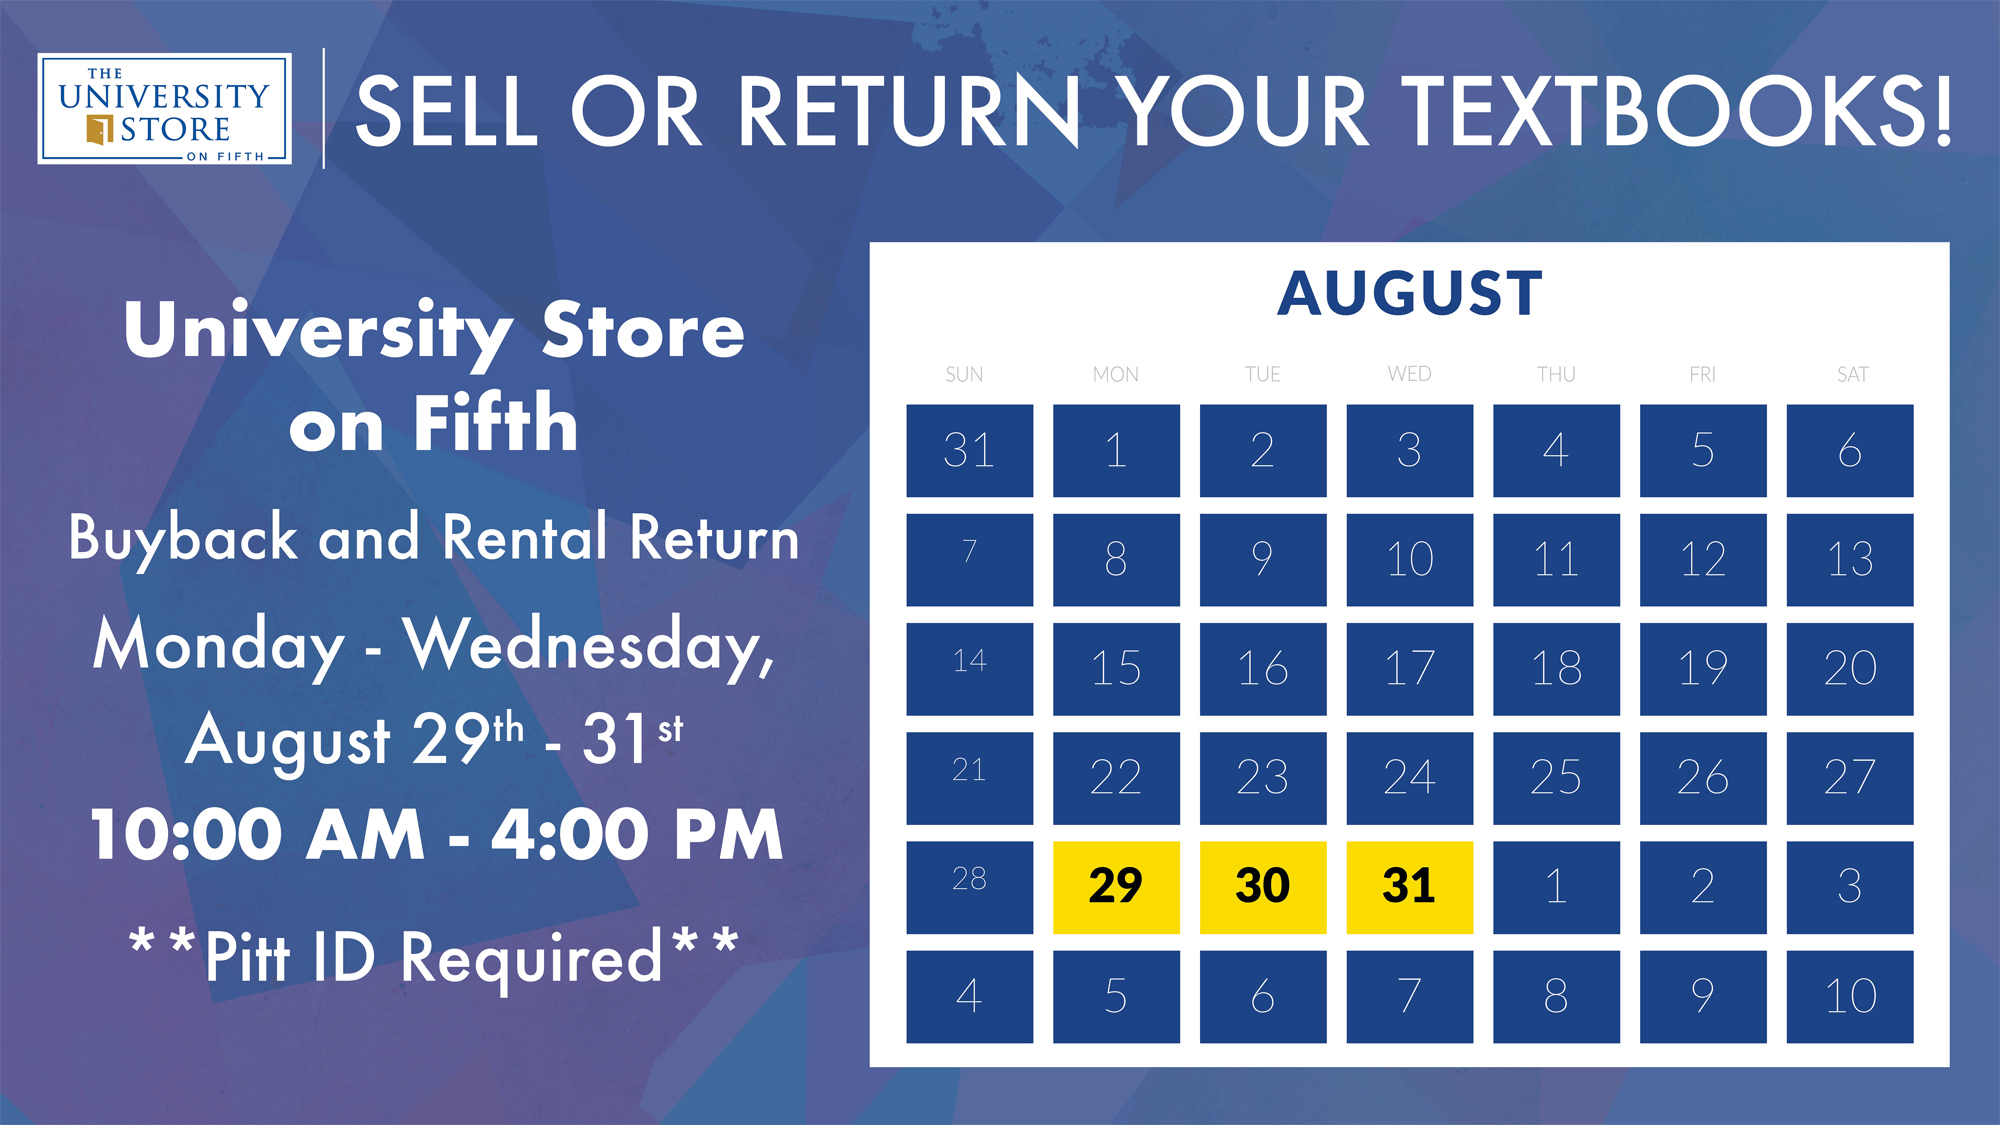 University Store on Fifth Buyback and Rental Return August 29th - 31st from 10 am to 4 pm